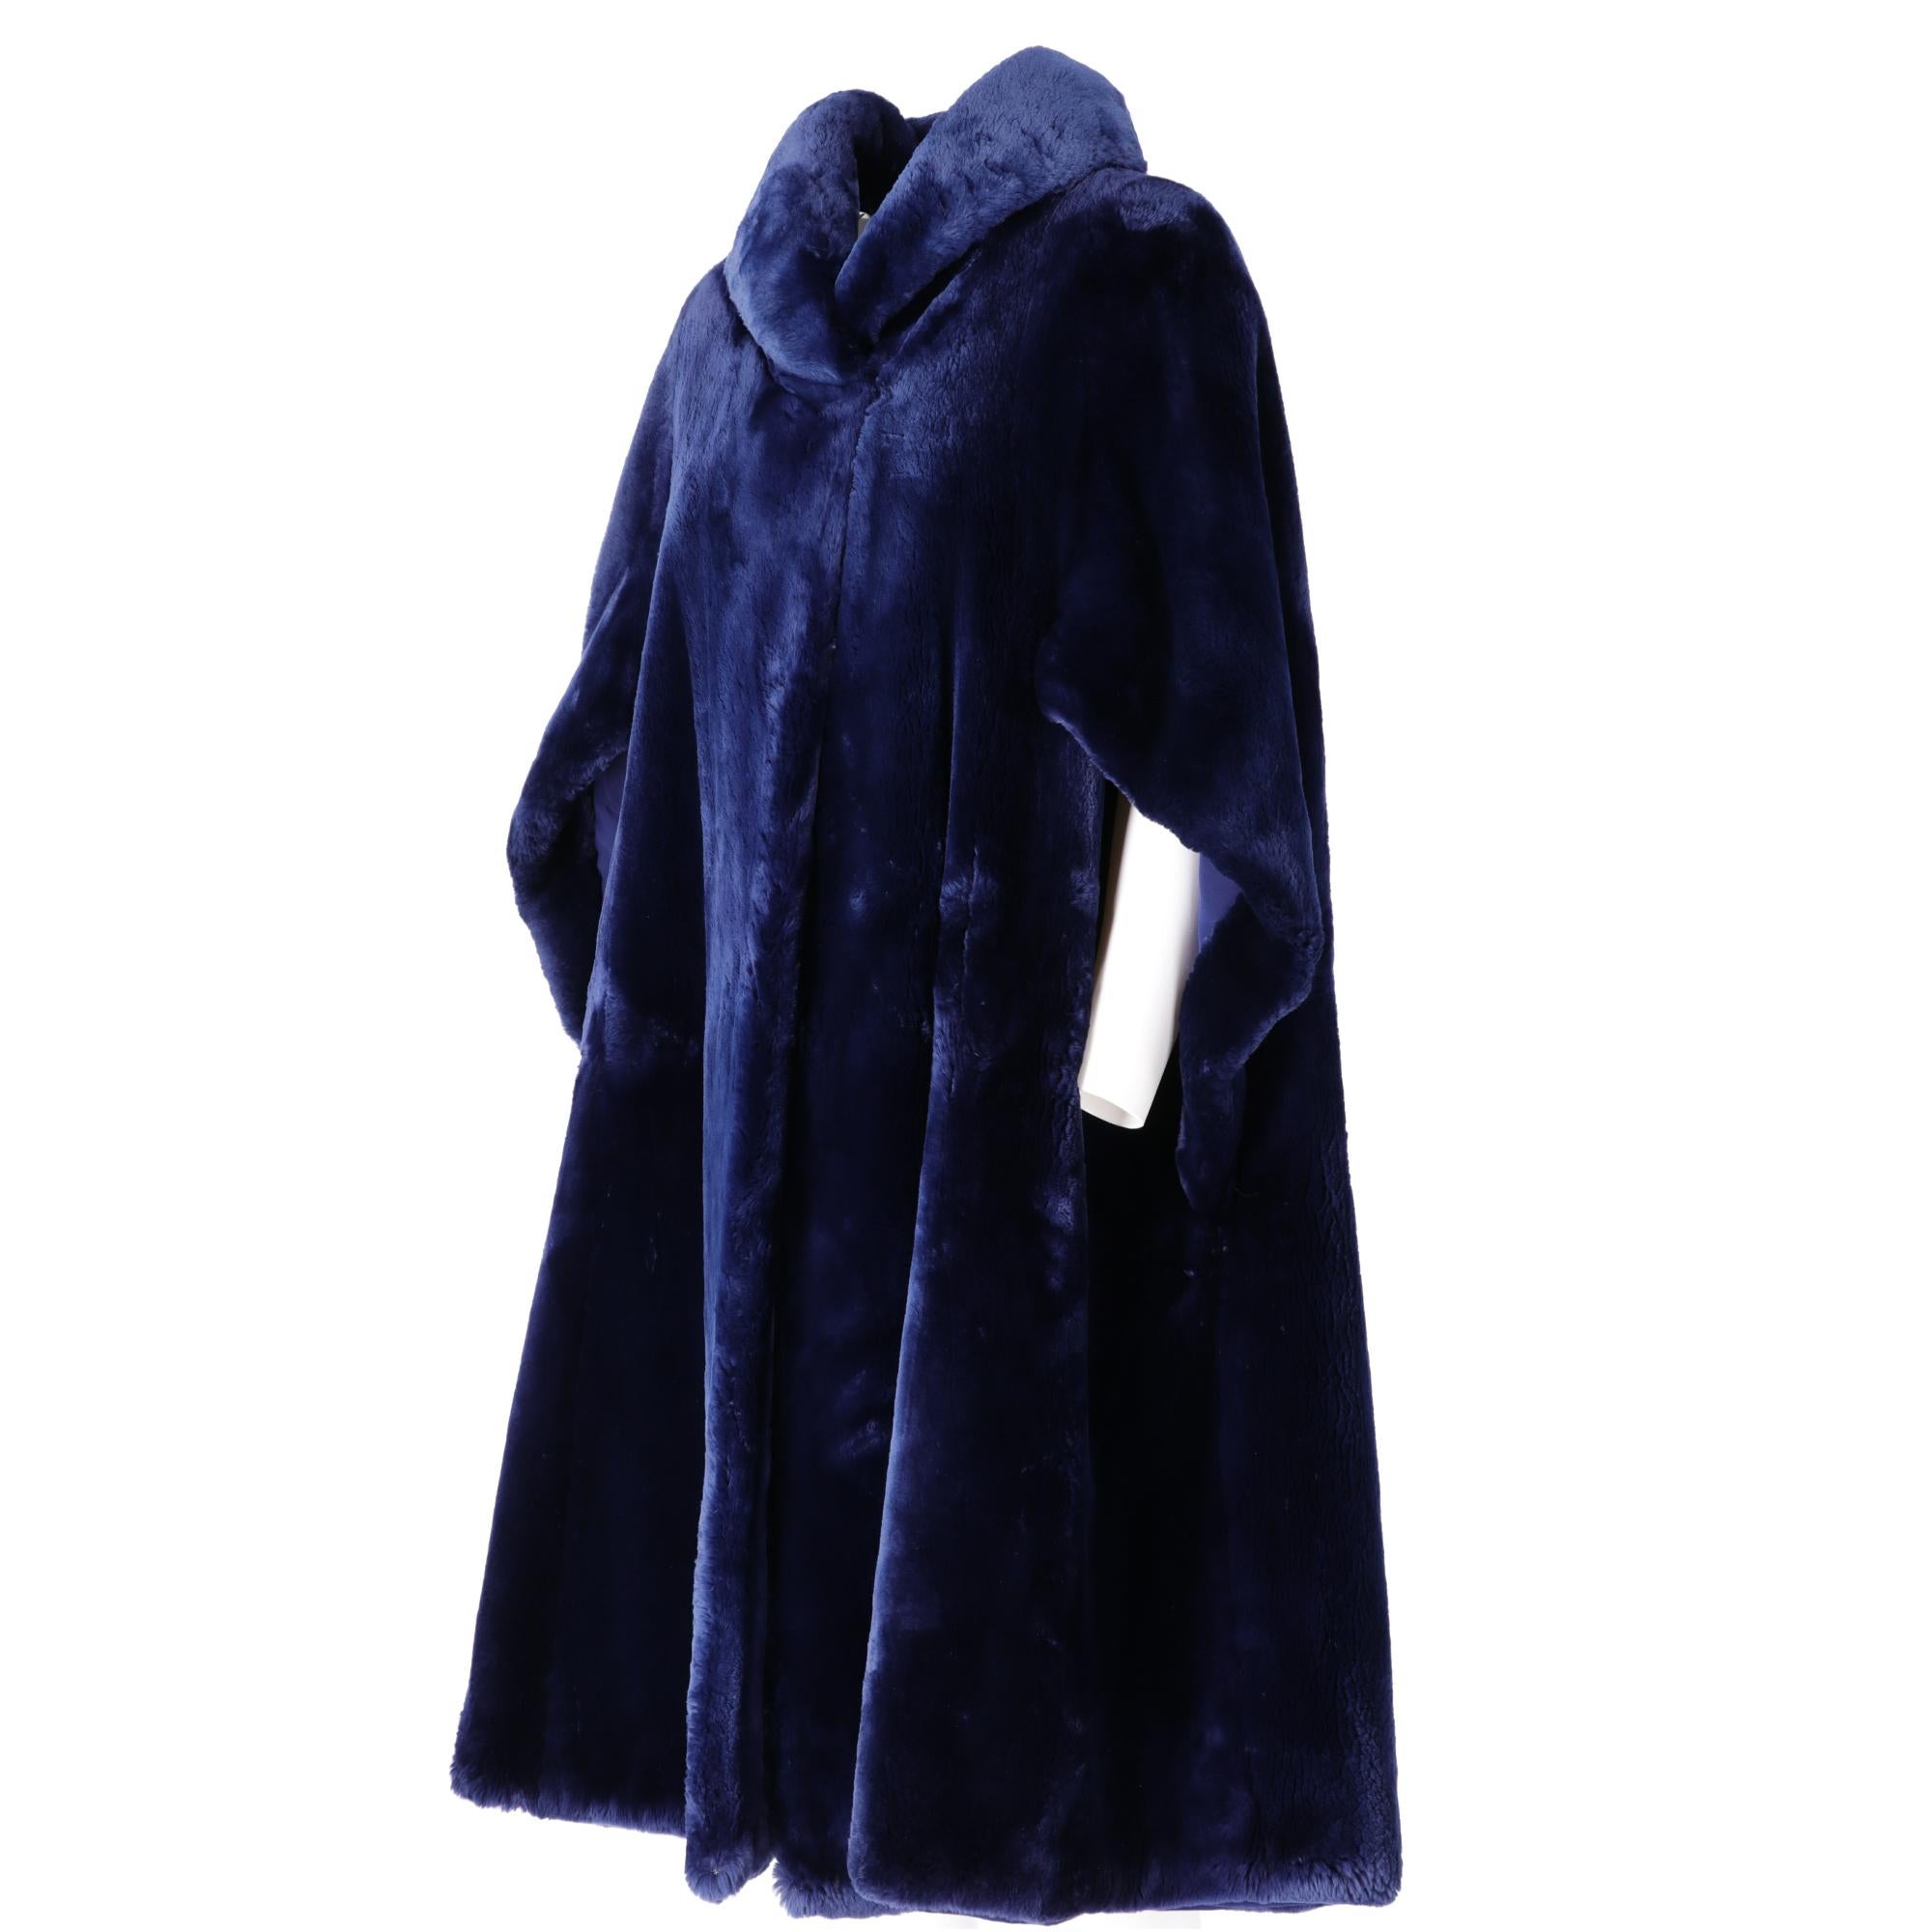 Balzani fur cape long below the knees, in real blue-tinted beaver fur, shawl collar, hidden pockets on the front in the seam, front lacing with hook and eyelet, blue fabric lining with embroidered initials, loose fit.

Please note this item cannot